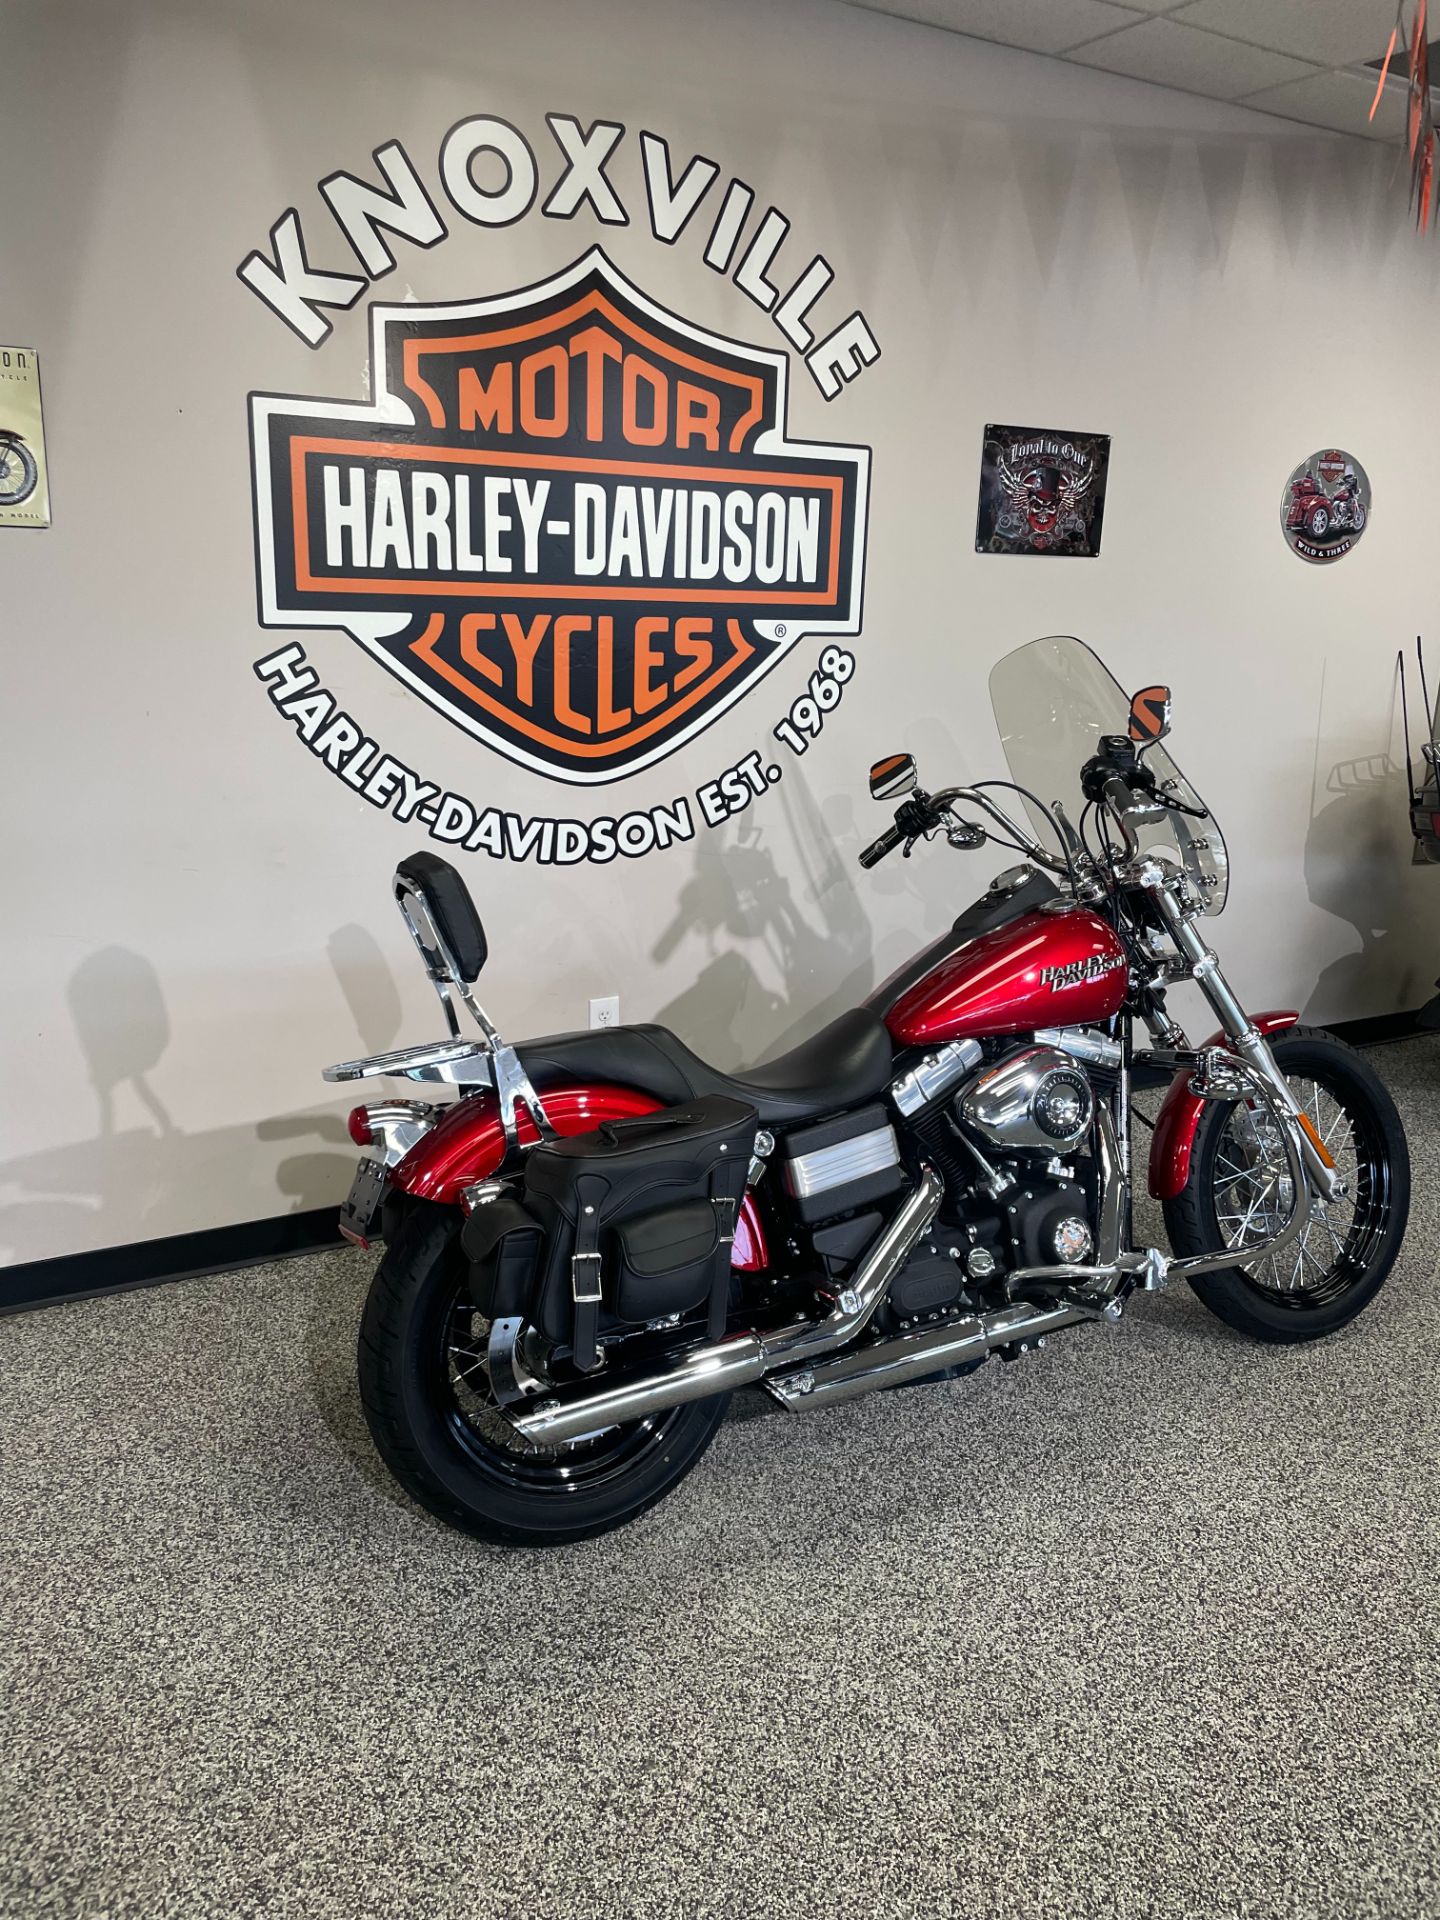 2012 Harley-Davidson DYNA STREET BOB in Knoxville, Tennessee - Photo 4